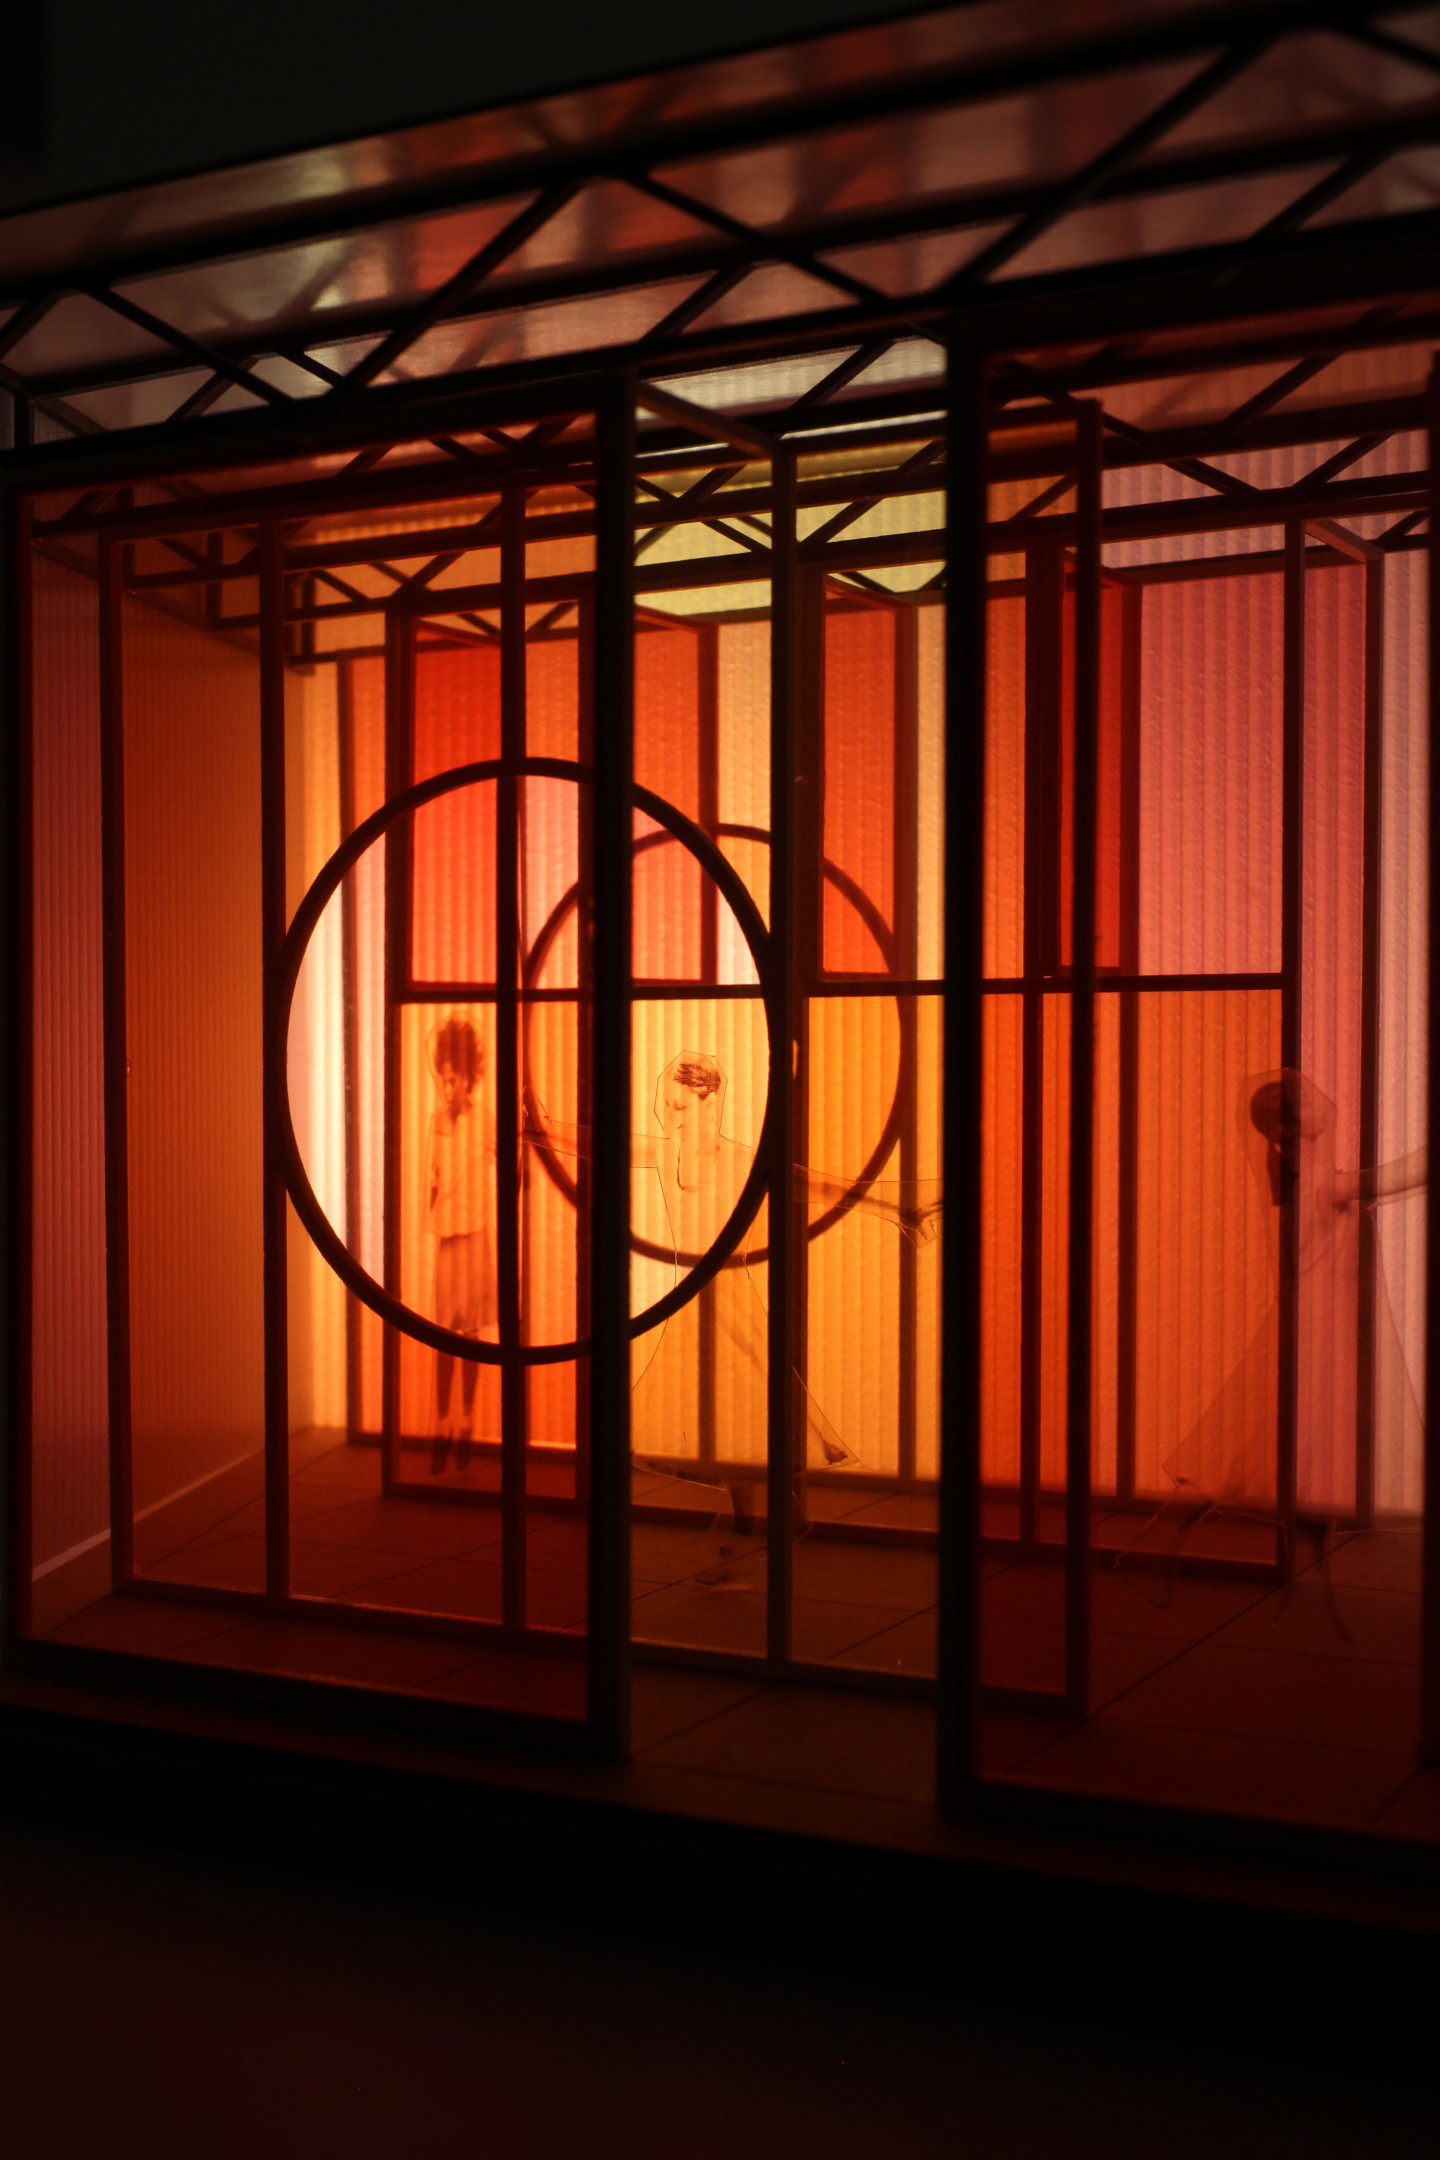 Colour Field by Studio Naama, made from lasercut, MDF, acetate sheets, polycarbonate envelope and LED lights. 